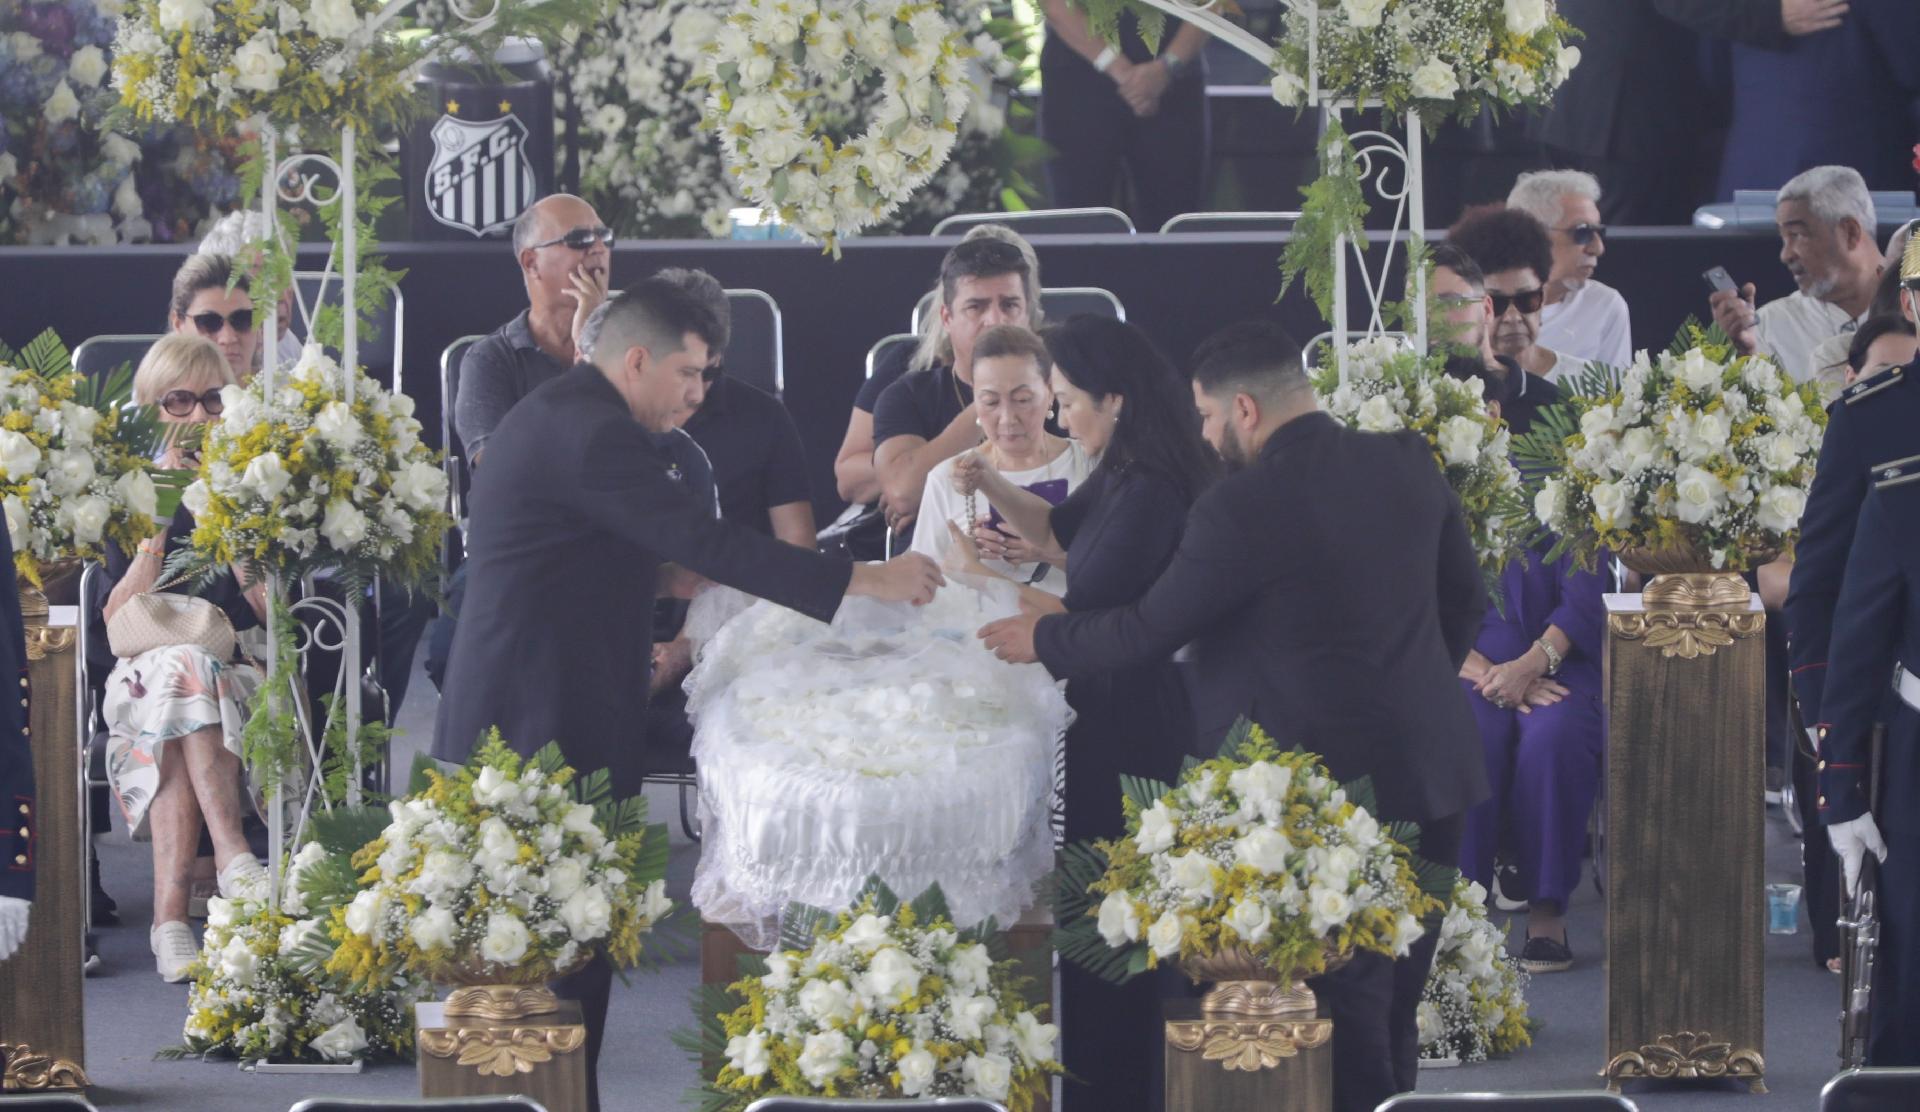 Marcia Aoki, Pele's widow, next to the coffin while waking up - Marcelo Justo / UOL